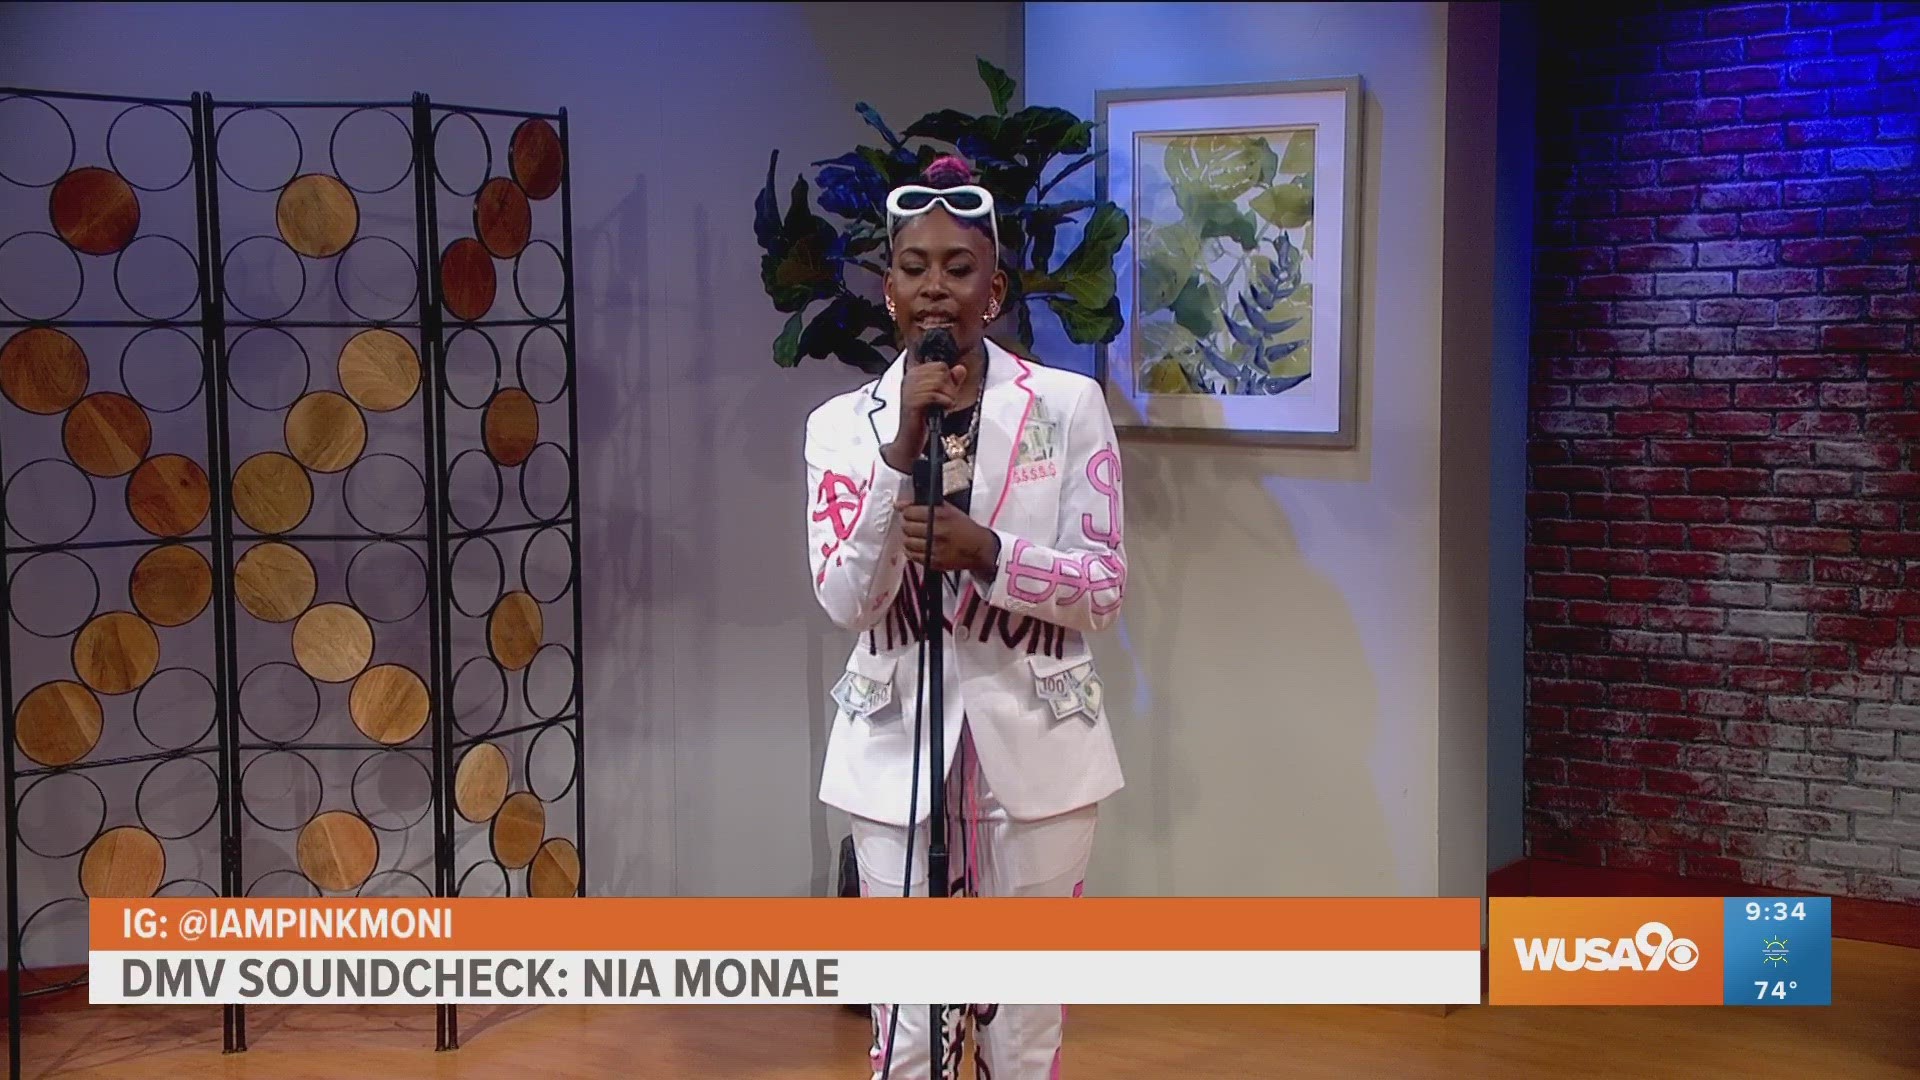 Dancer, model, and 3x Wammie Music Award-winning artist Nia Monae performs her song "10,000 hours" on the DMV Soundcheck